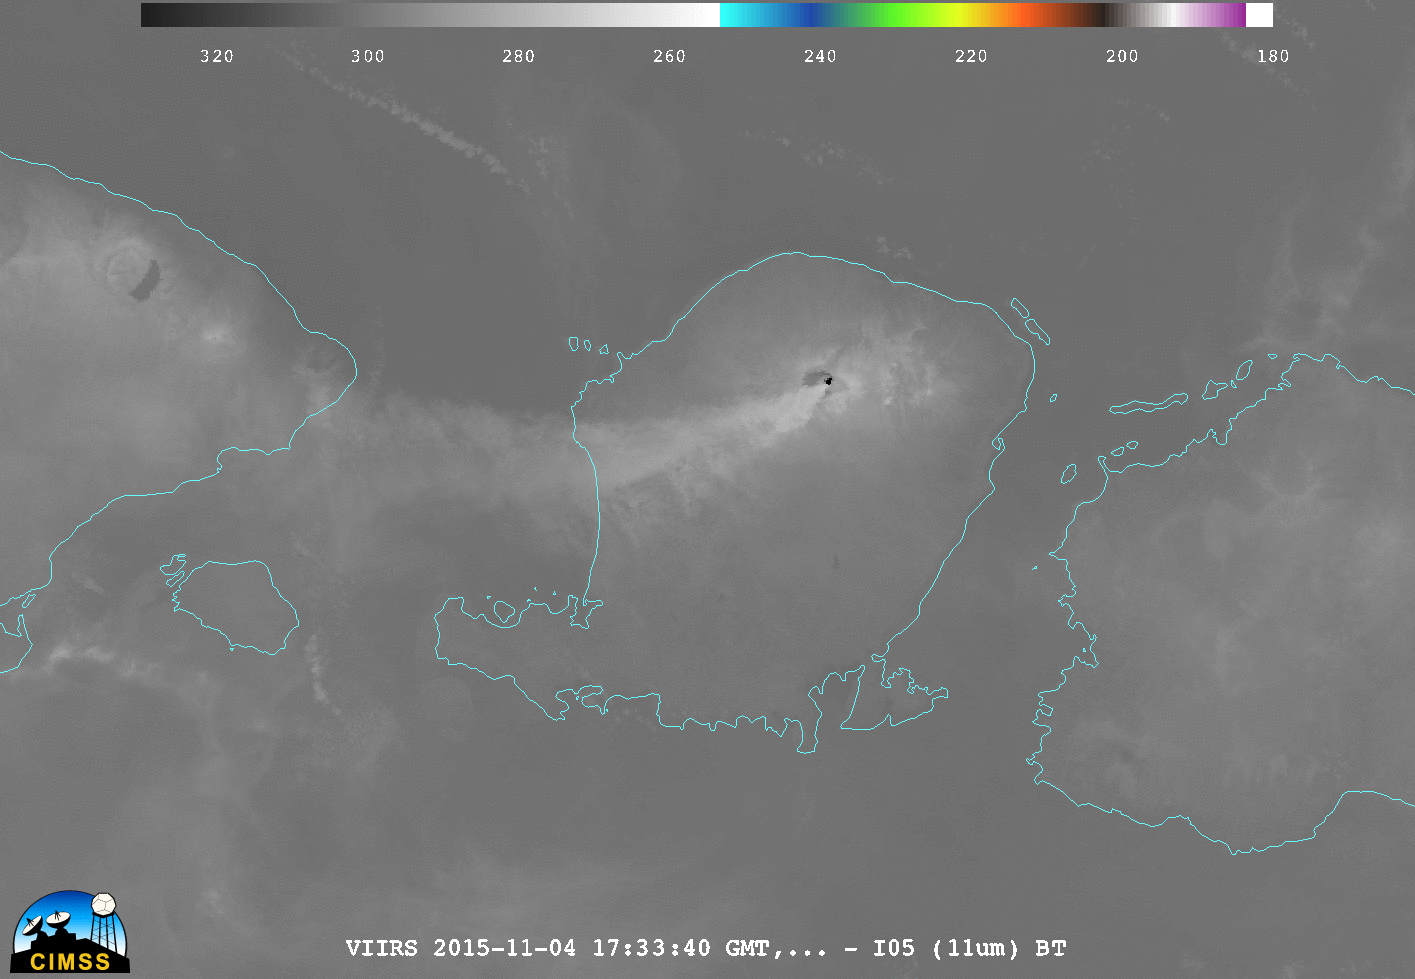 Suomi NPP VIIRS Day/Night Band (0.7 µm), near-IR (1.6 µm), shortwave IR (3.74 µm), and IR (11.45 µm) images [click to enlarge] 